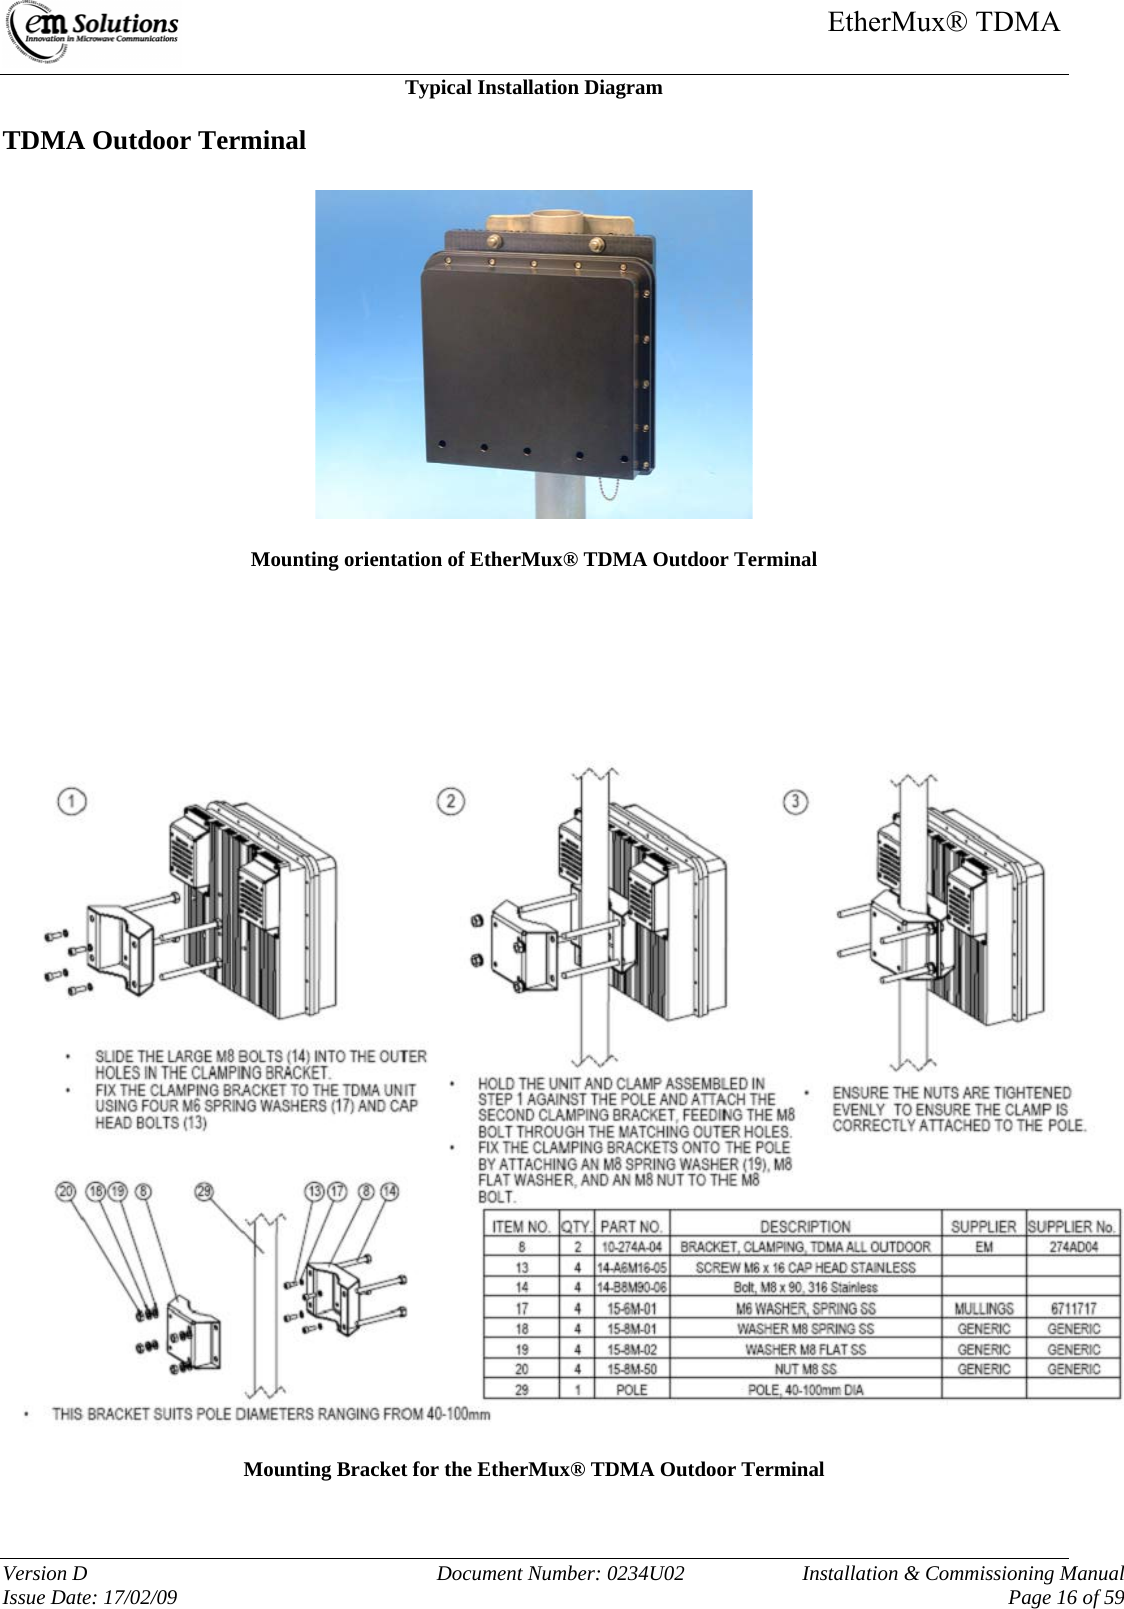     EtherMux® TDMA   Version D  Document Number: 0234U02   Installation &amp; Commissioning Manual Issue Date: 17/02/09     Page 16 of 59 Typical Installation Diagram TDMA Outdoor Terminal    Mounting orientation of EtherMux® TDMA Outdoor Terminal         Mounting Bracket for the EtherMux® TDMA Outdoor Terminal   